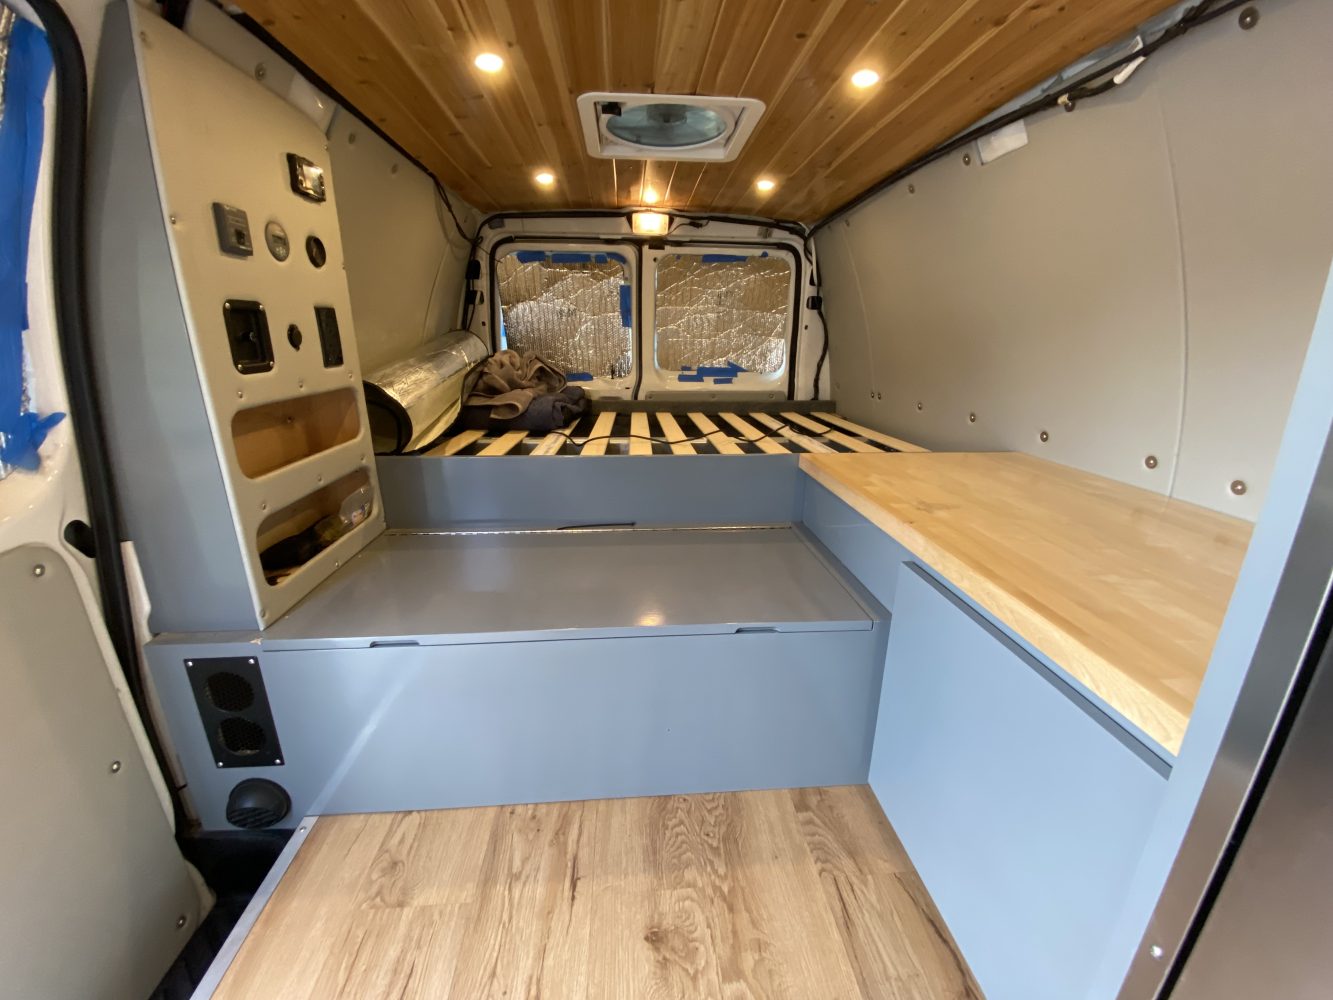 Overland Classifieds :: 2006 5.4-liter Ford Econoline E-250 Campervan -  Expedition Portal